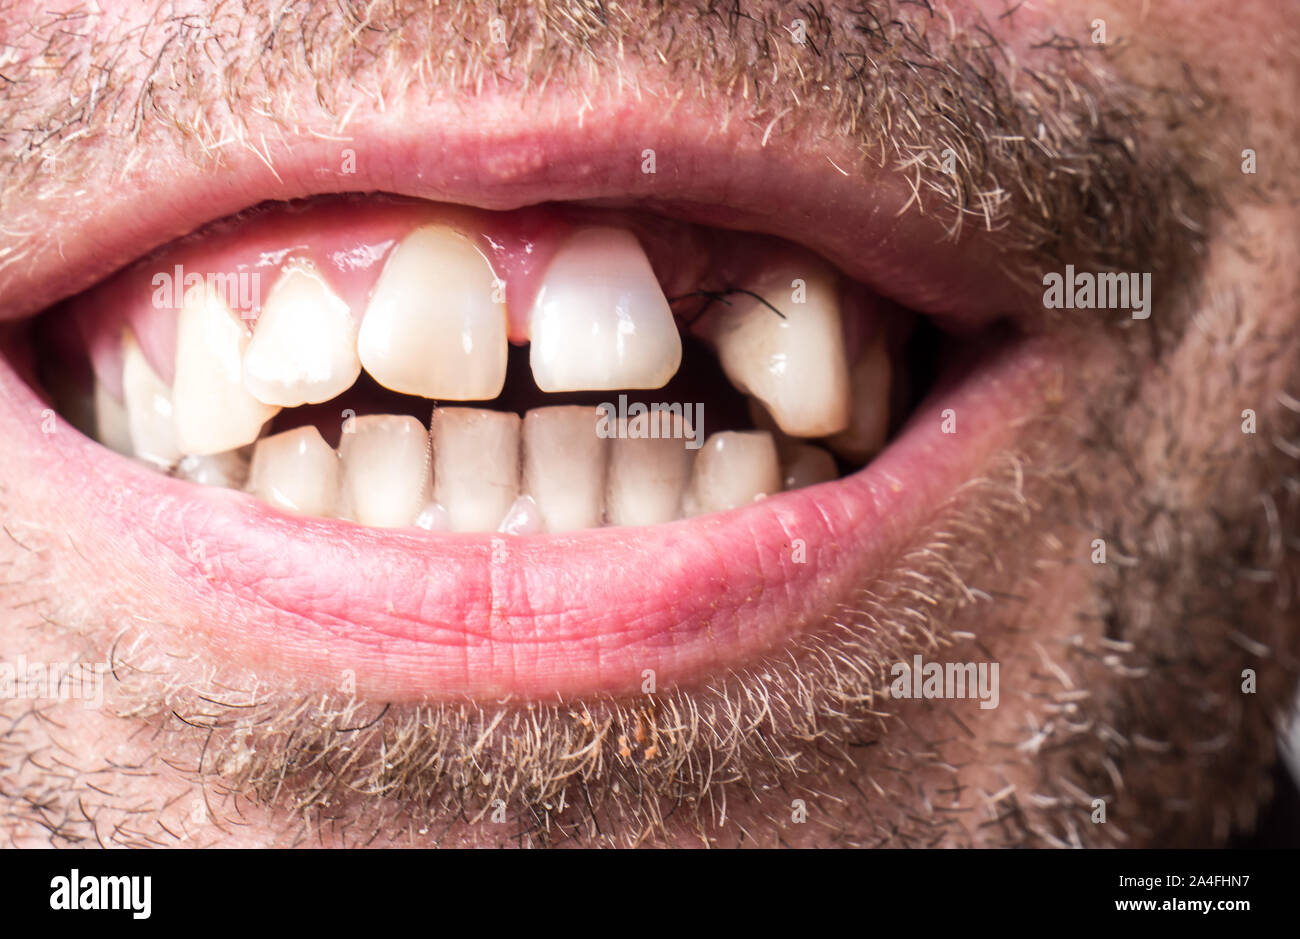 tooth gap after a cyst surgery Stock Photo